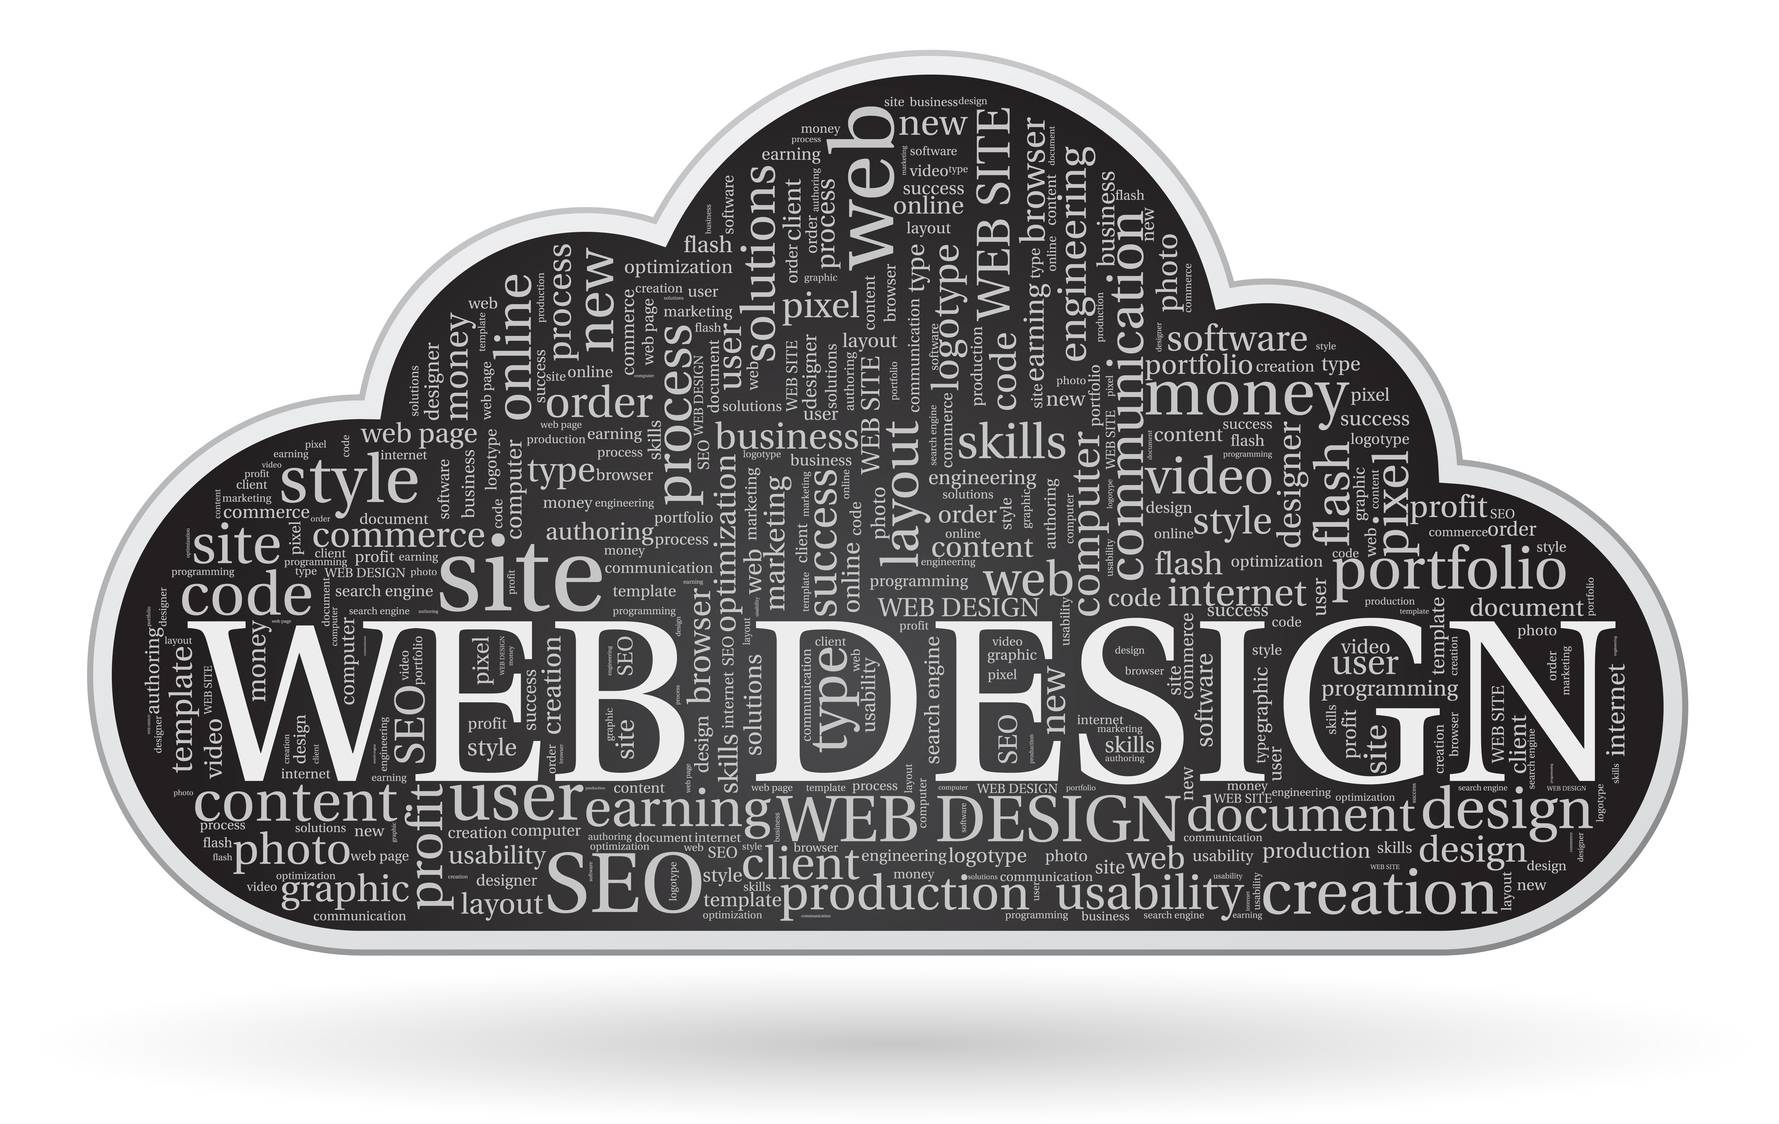 Frisco Web Design: To Look Professional, you Need OskyBlue